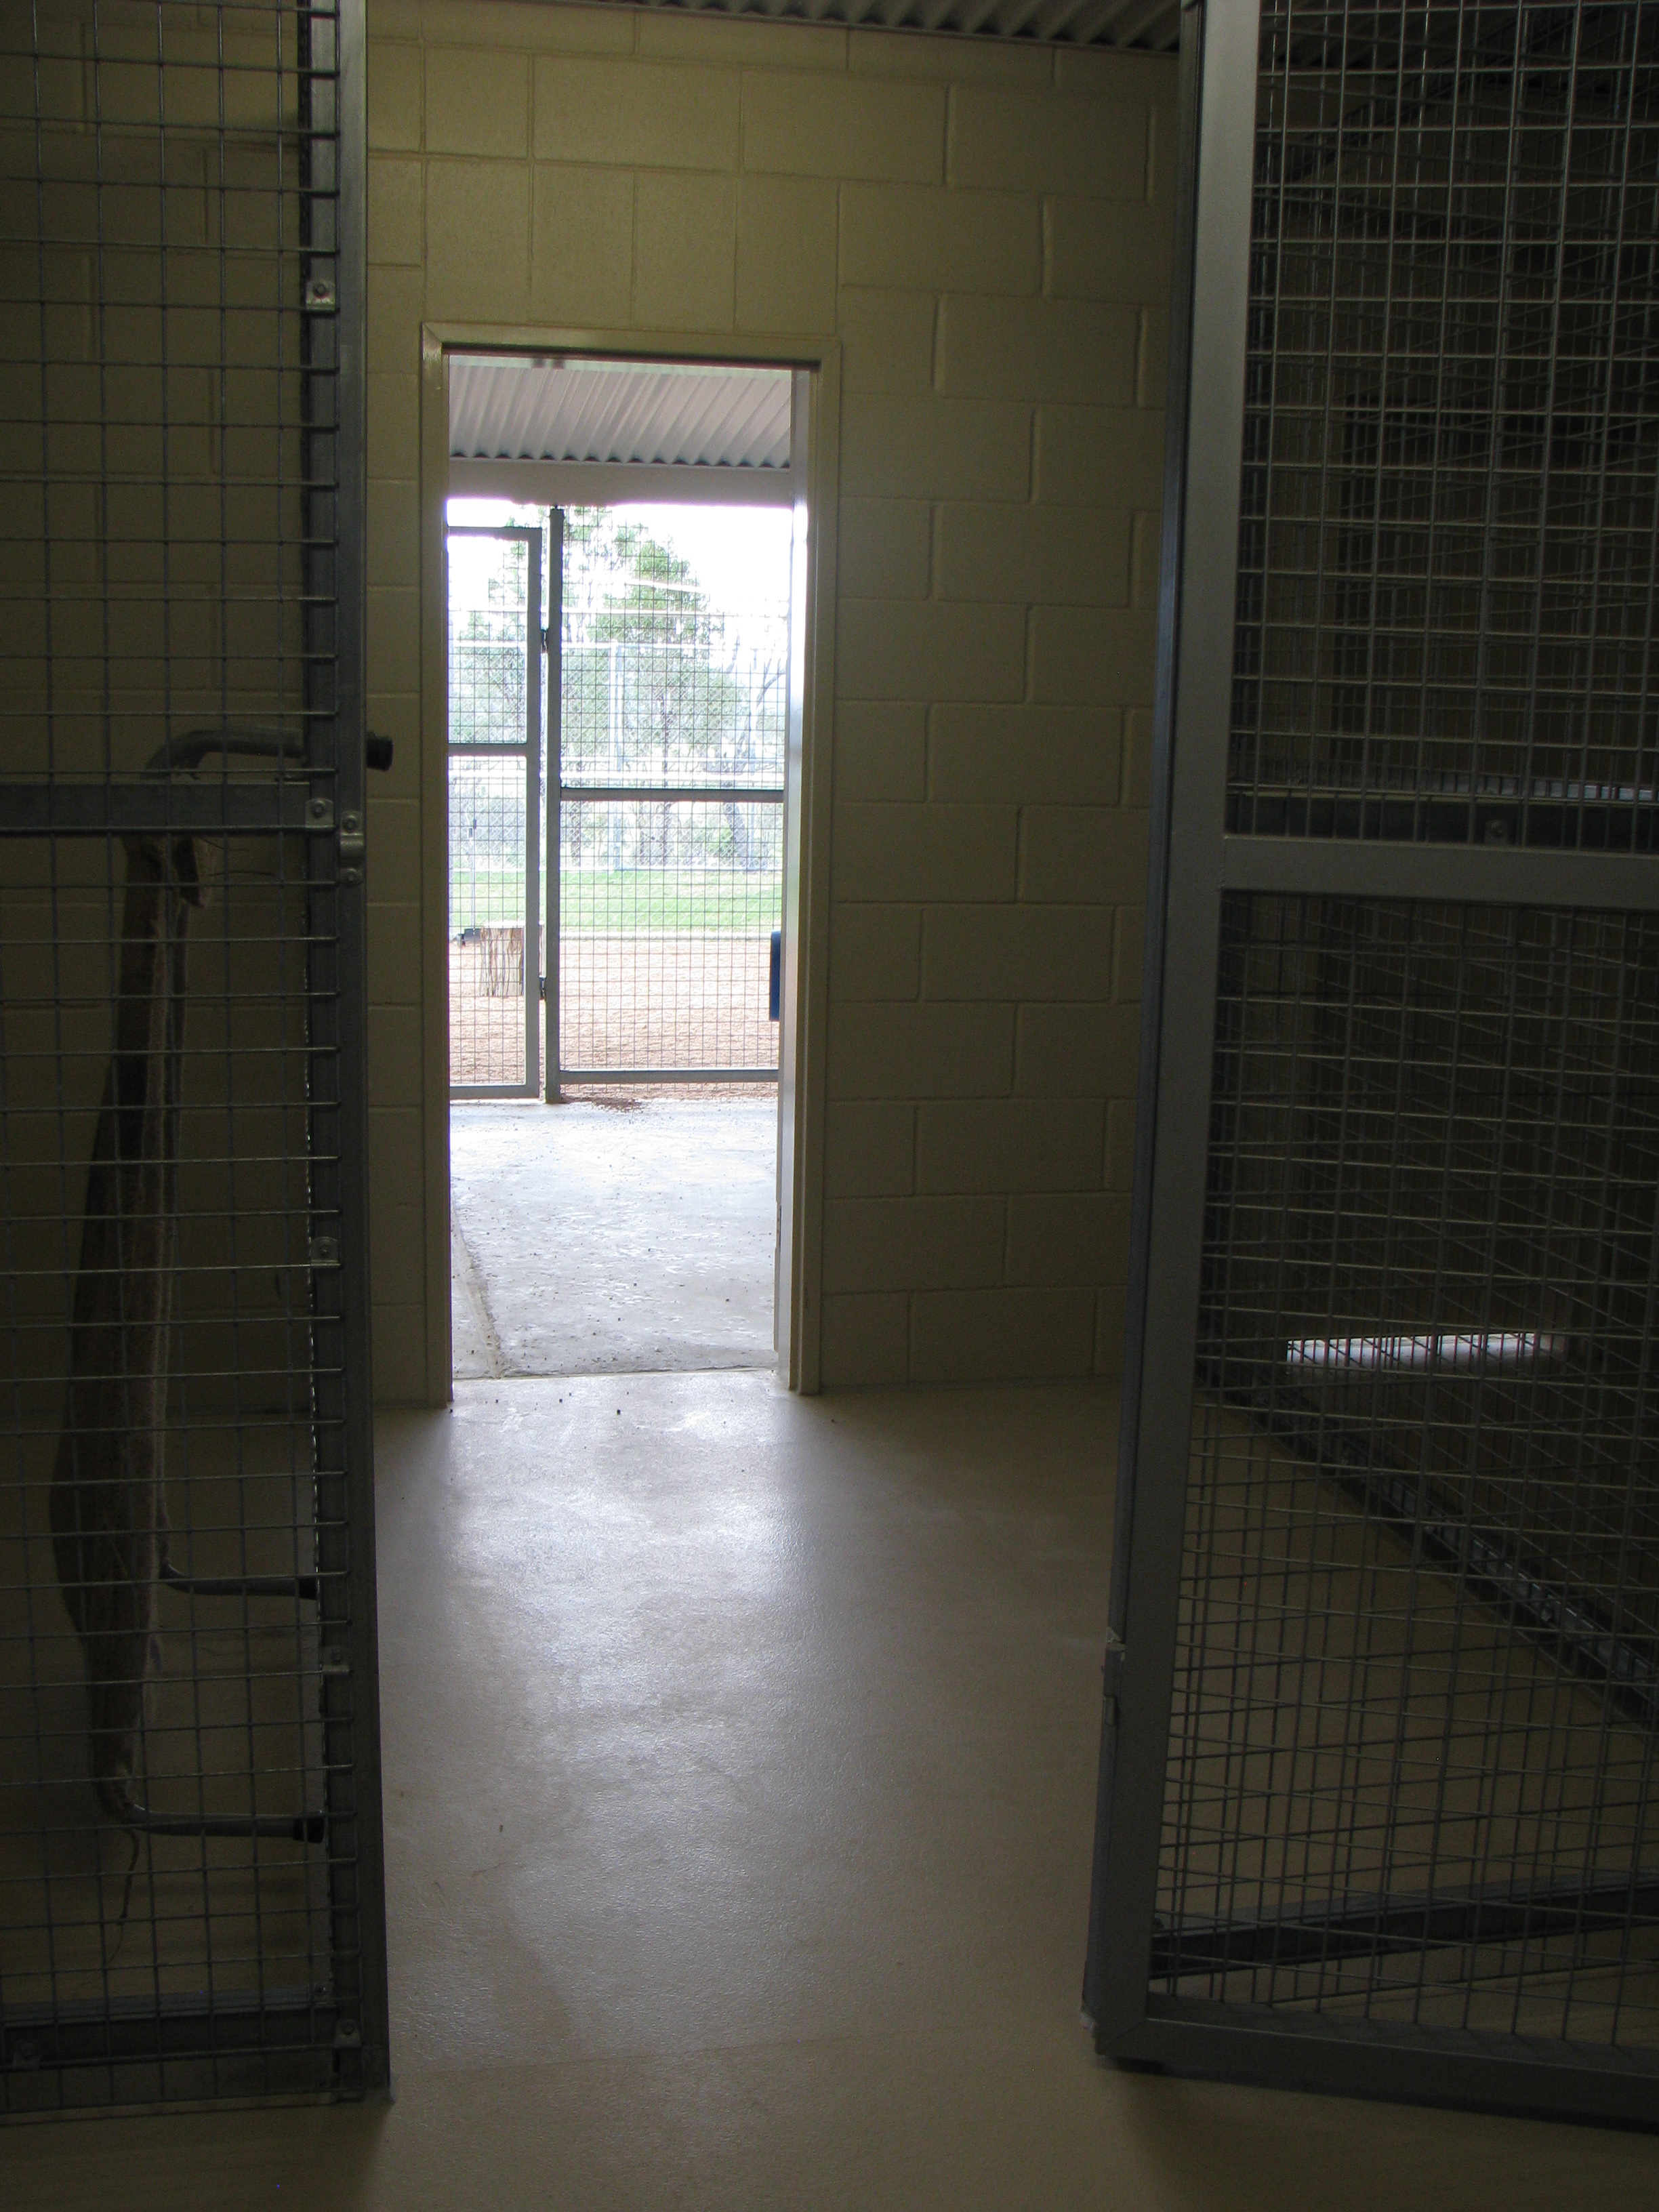 There is an internal kennel and external kennel